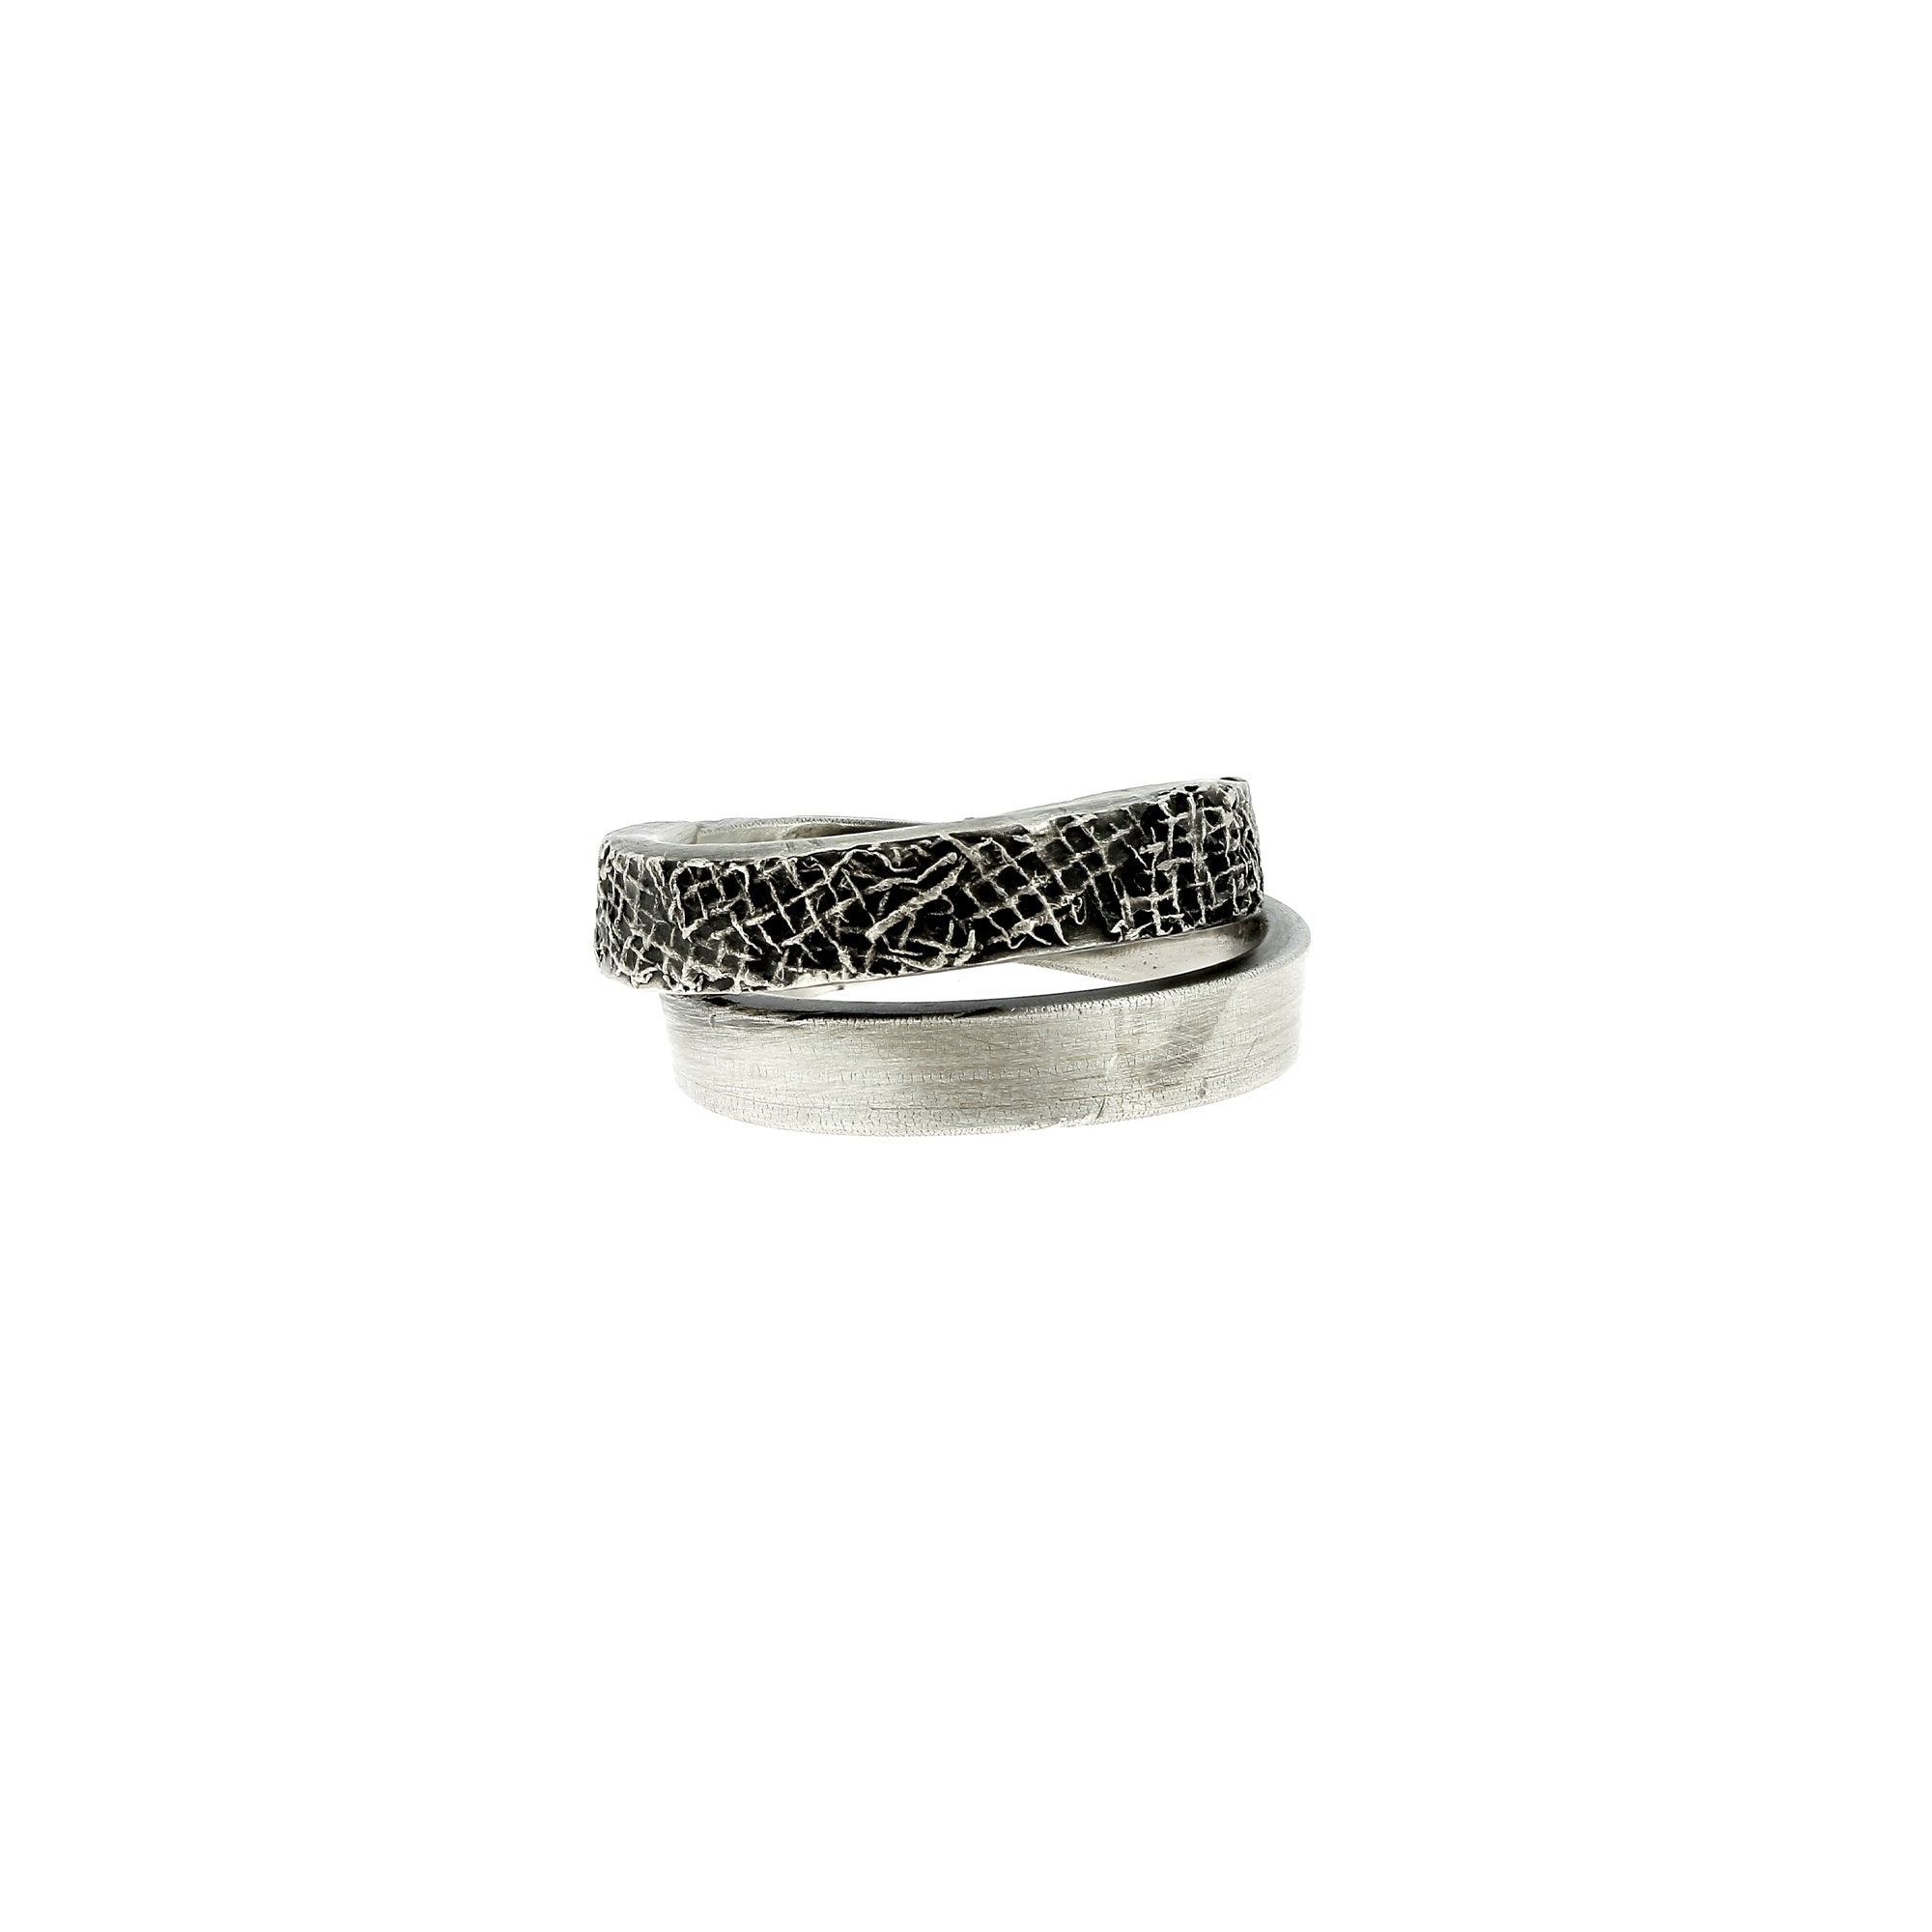 Double Banded Ring with Bandage Texture